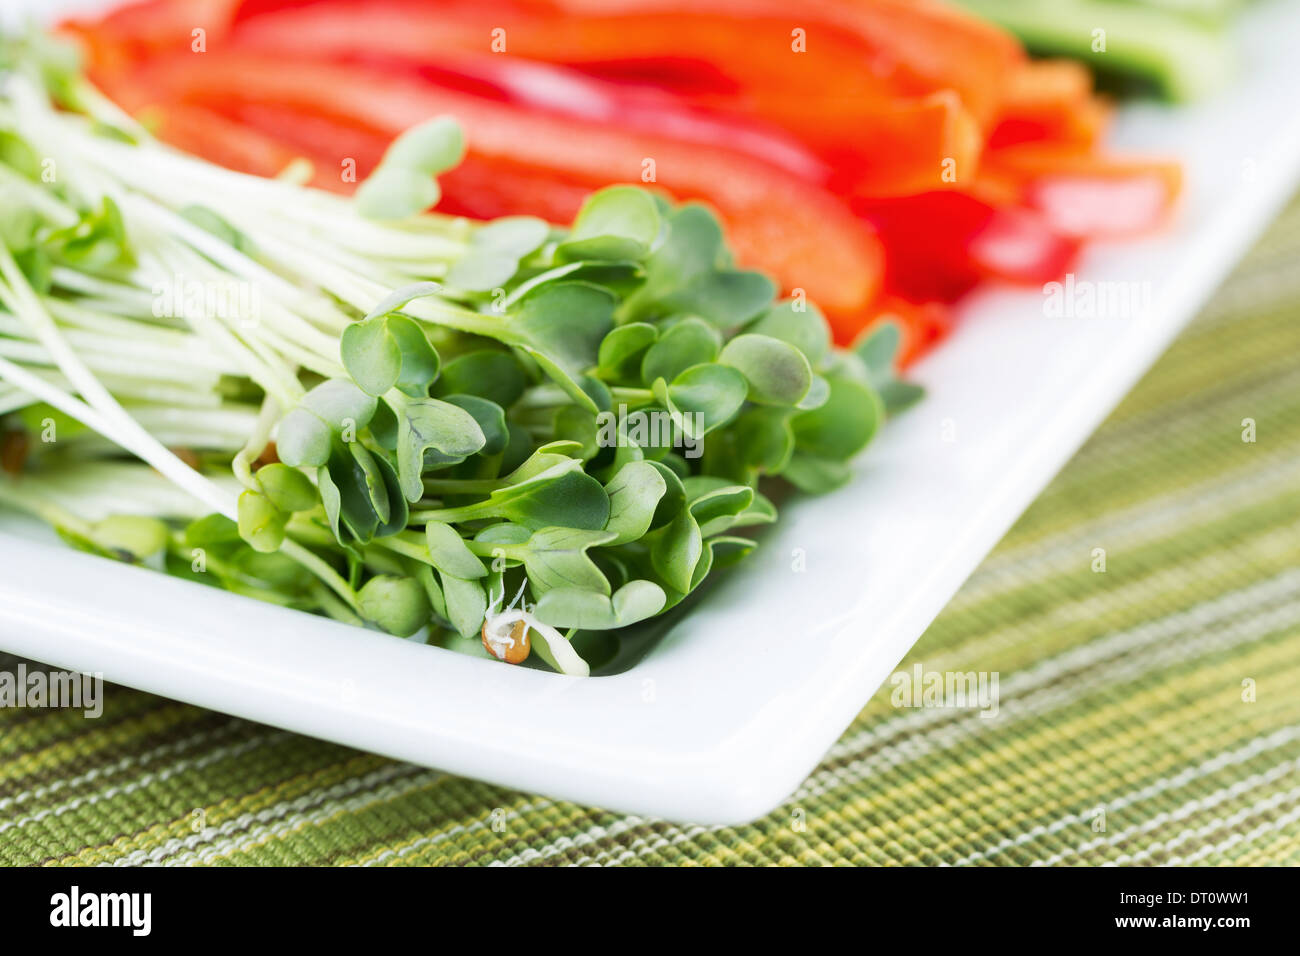 Closeup horizontal photo of fresh daikon radish sproutsused as sushi ingredients placed in white plate with textured table cloth Stock Photo